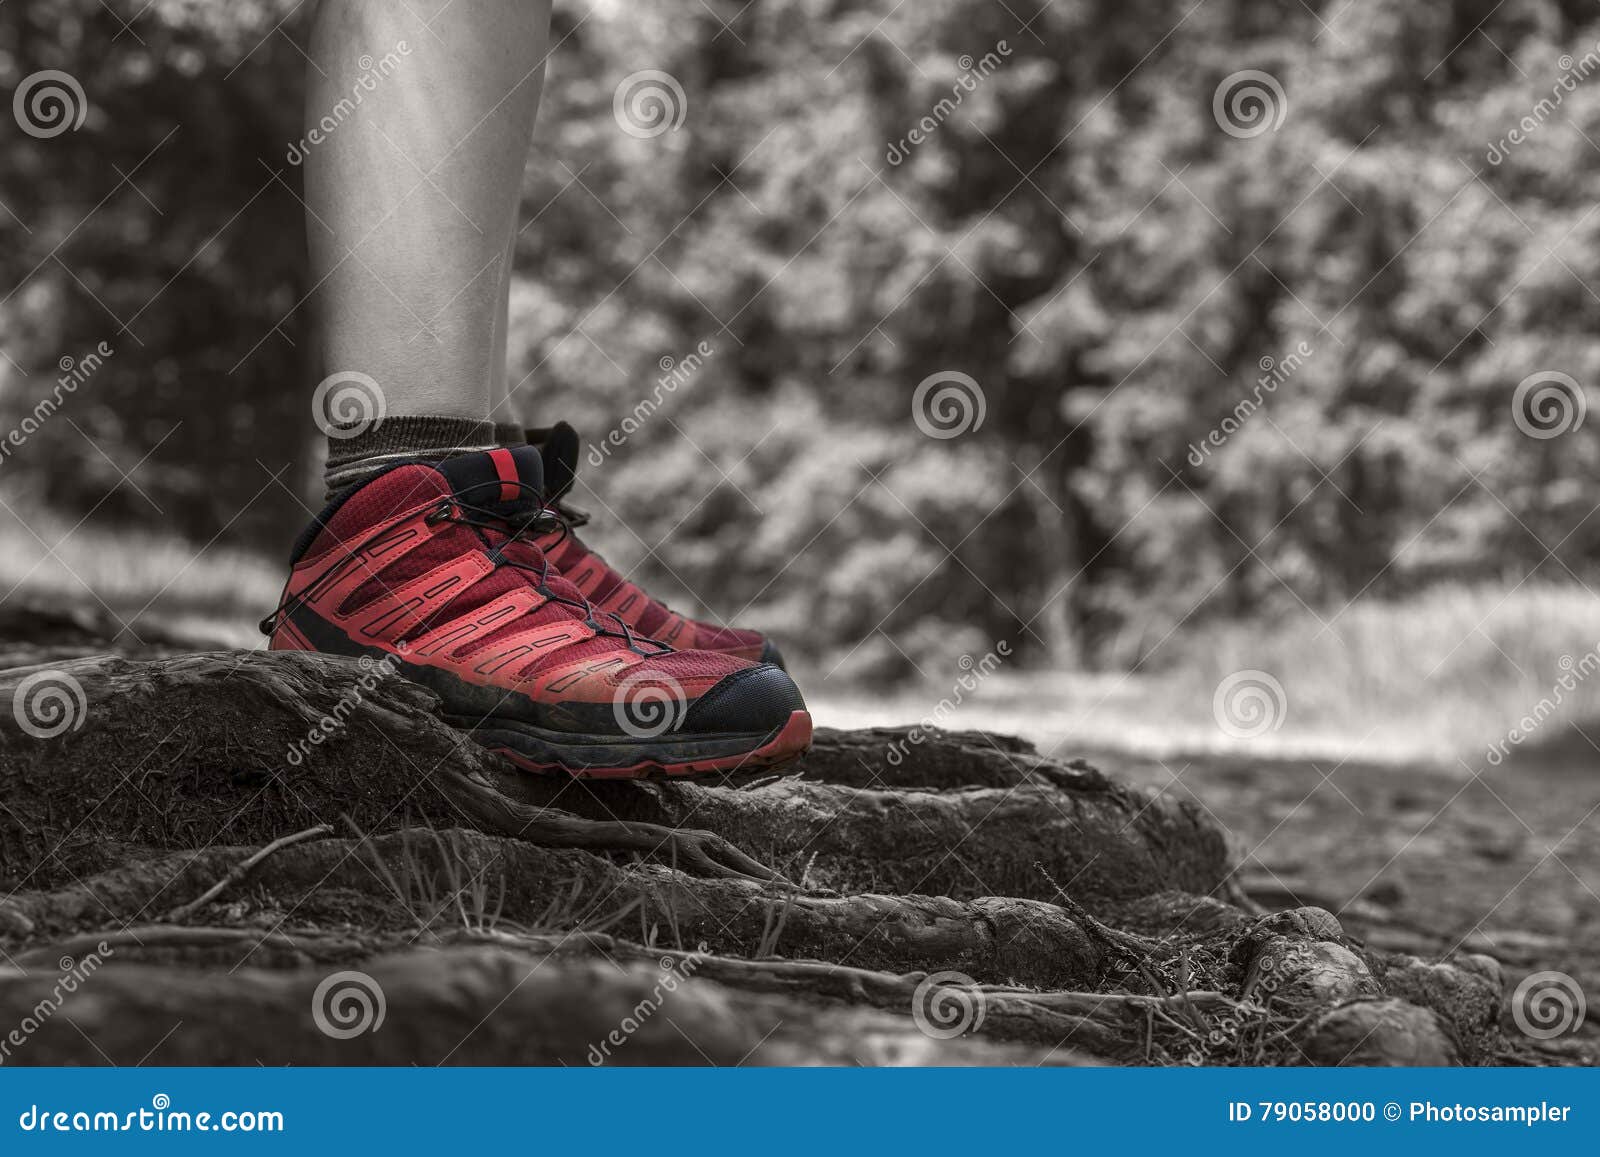 Standing on a Rough Terrain Stock Photo - Image of person, activity ...